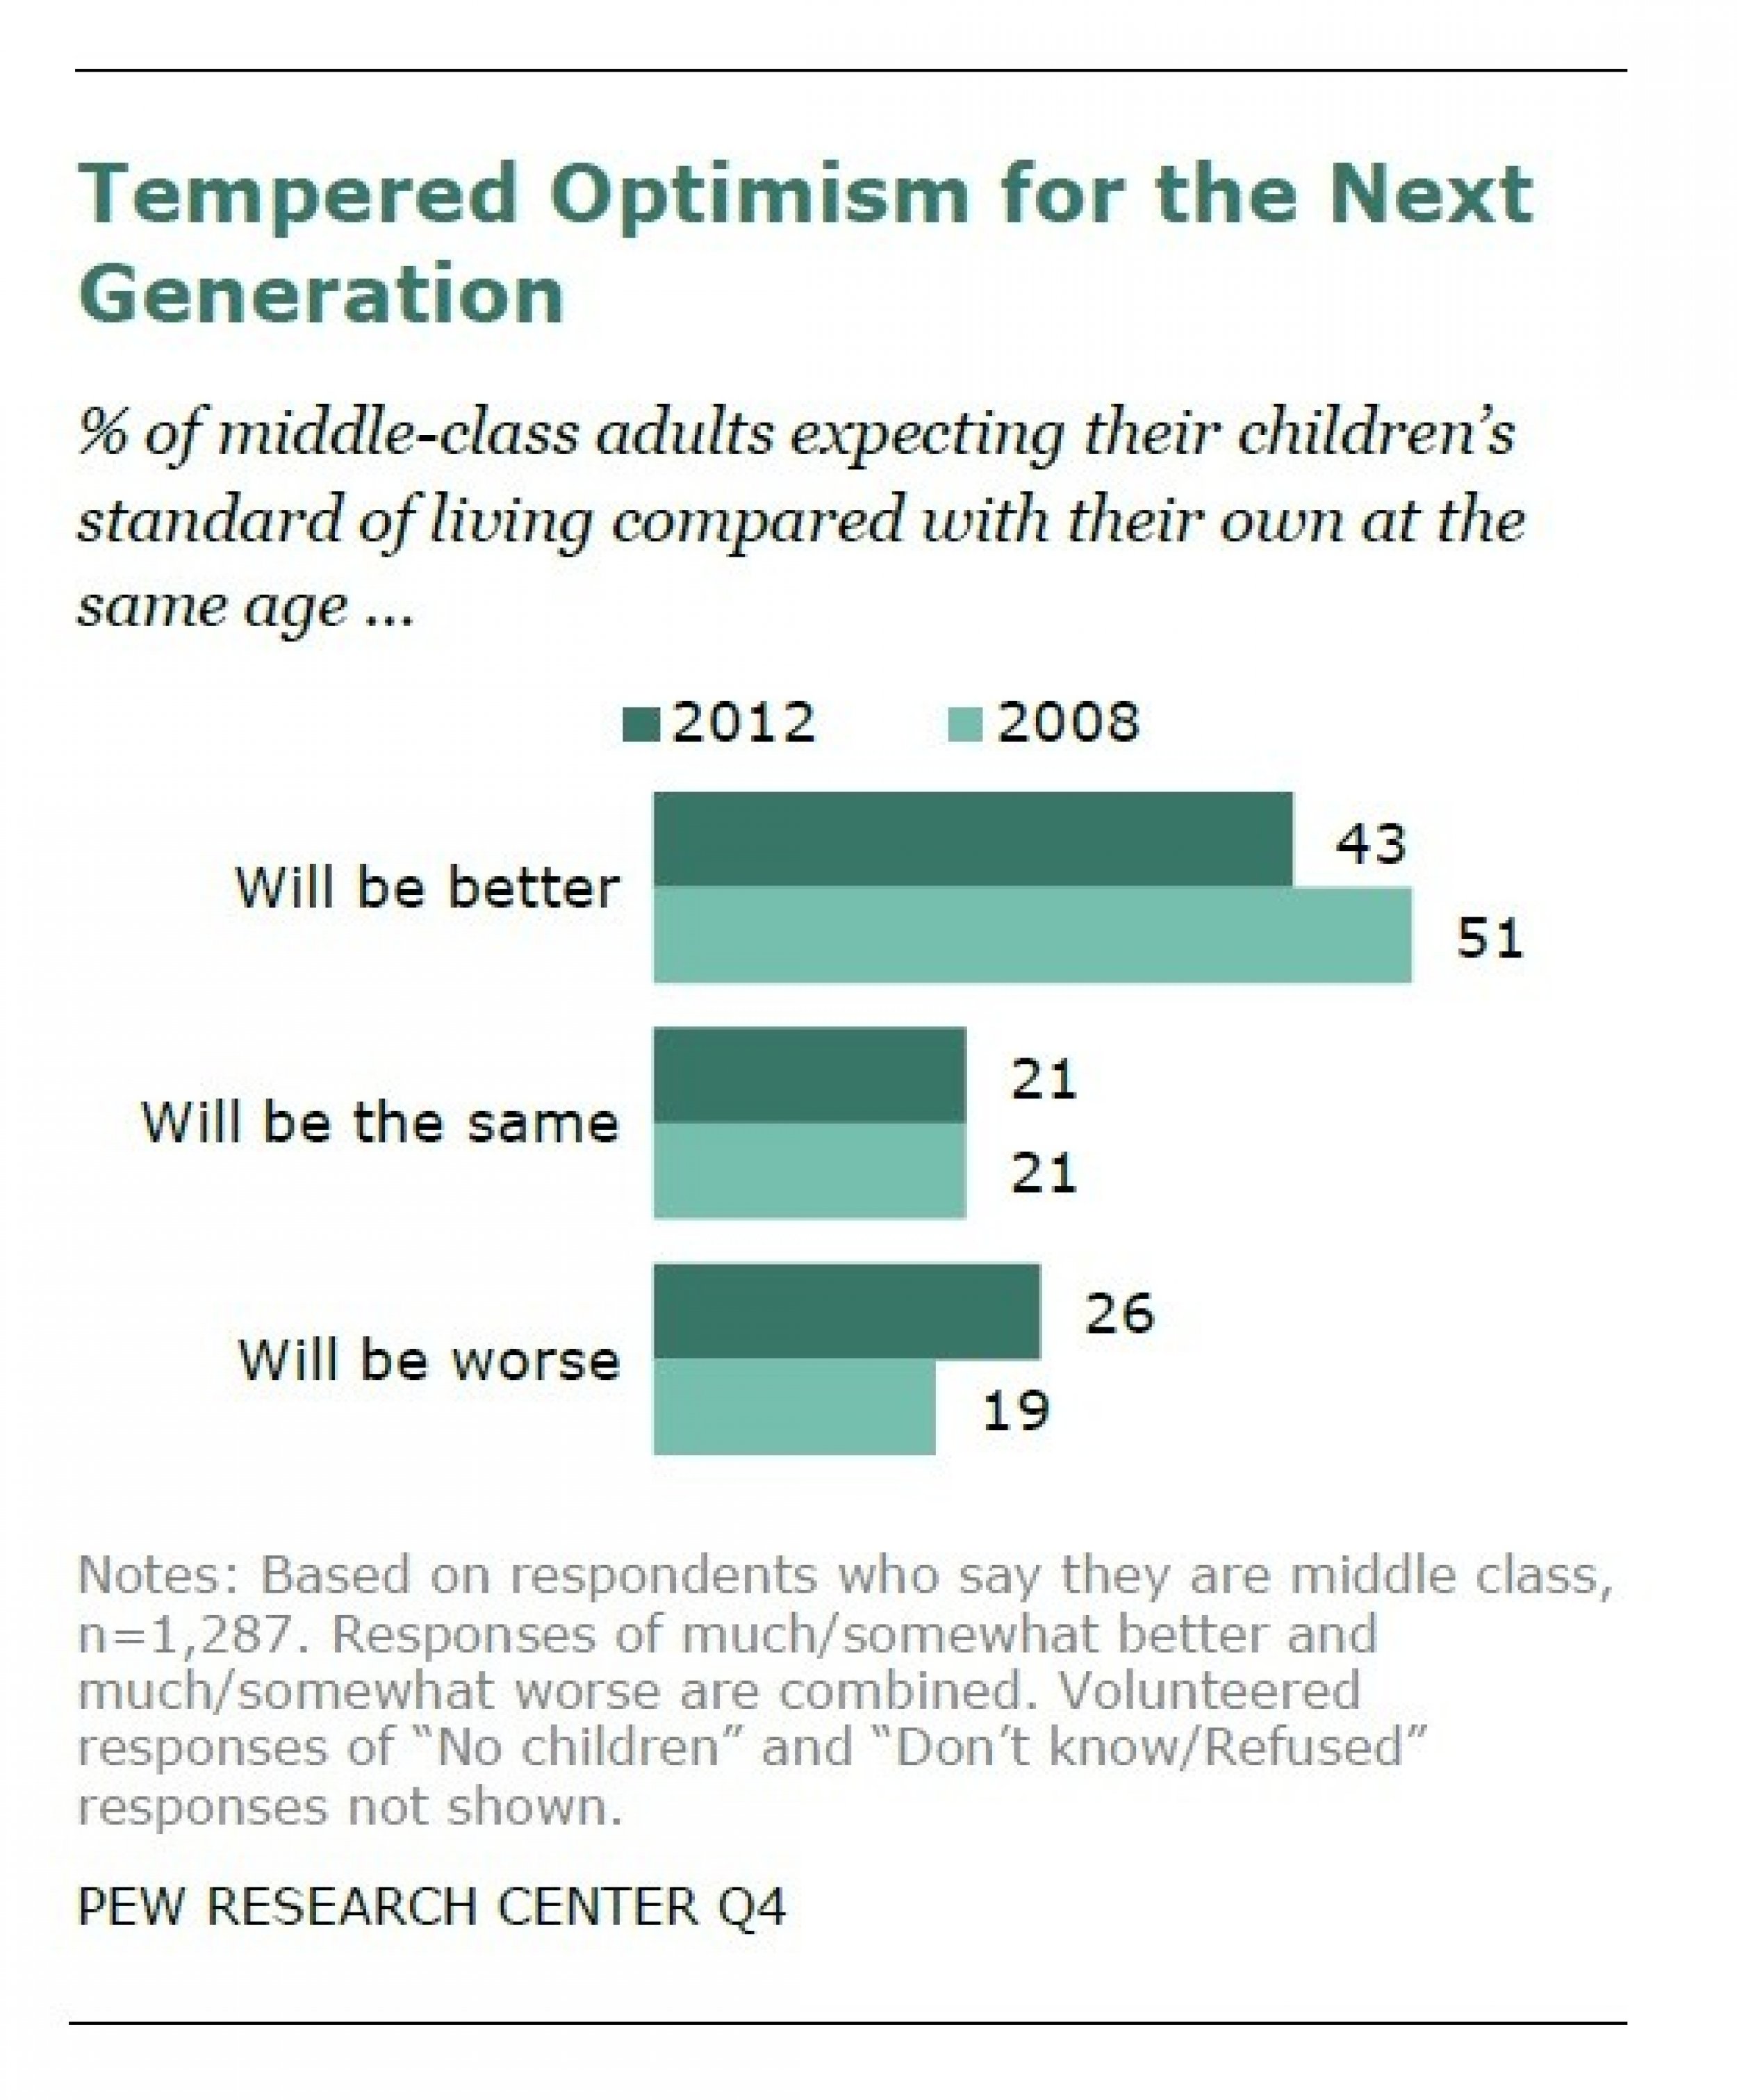 And many now see less hope for future generations.